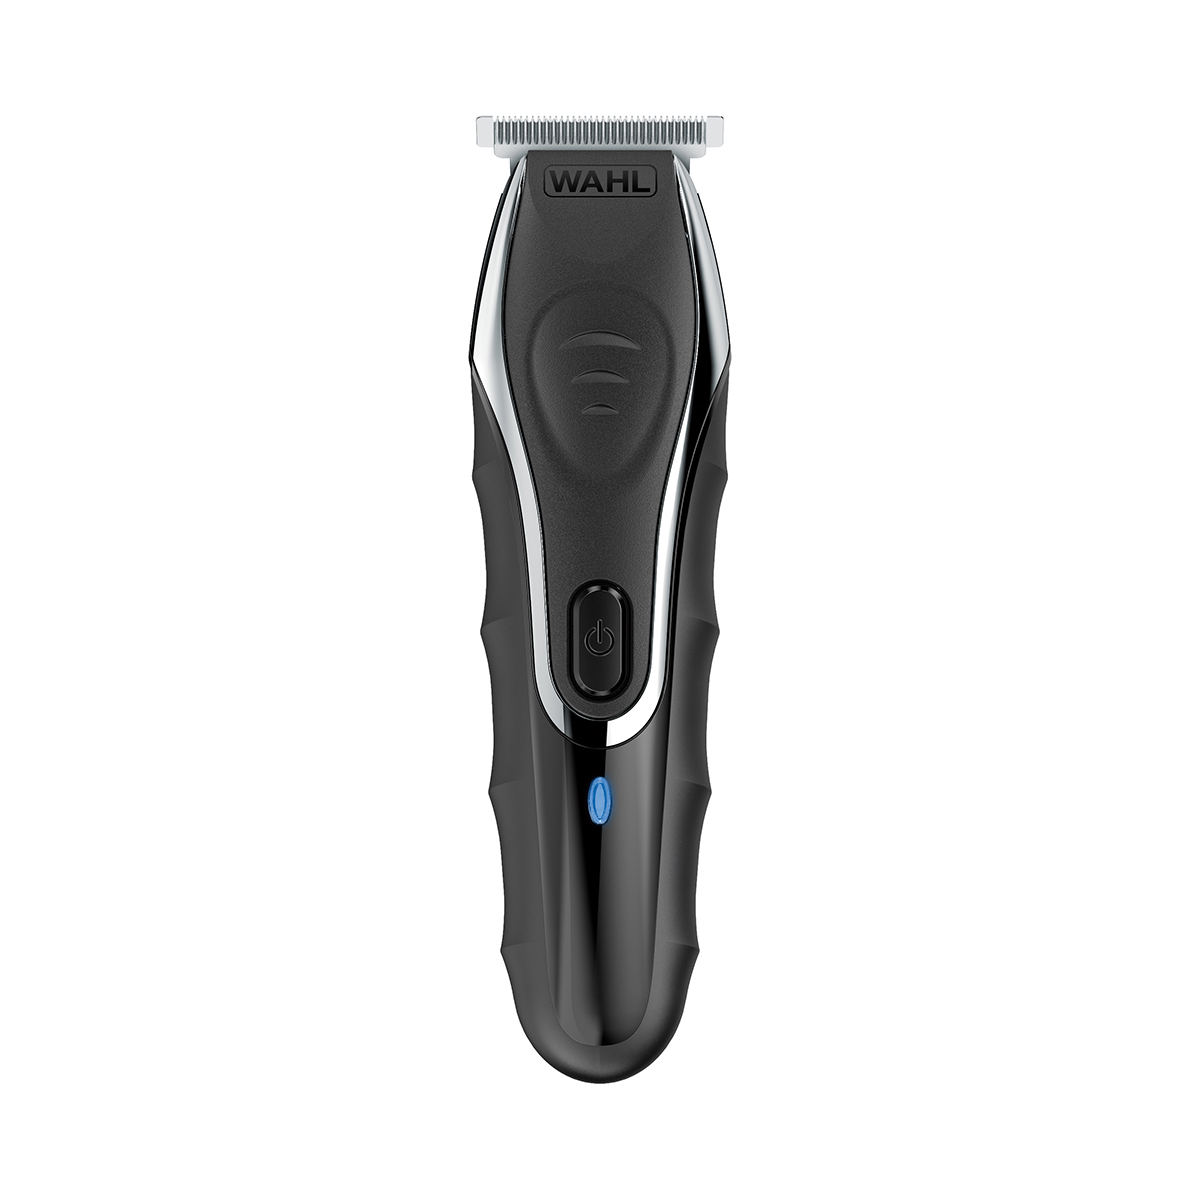 Product Listing | Wahl Global